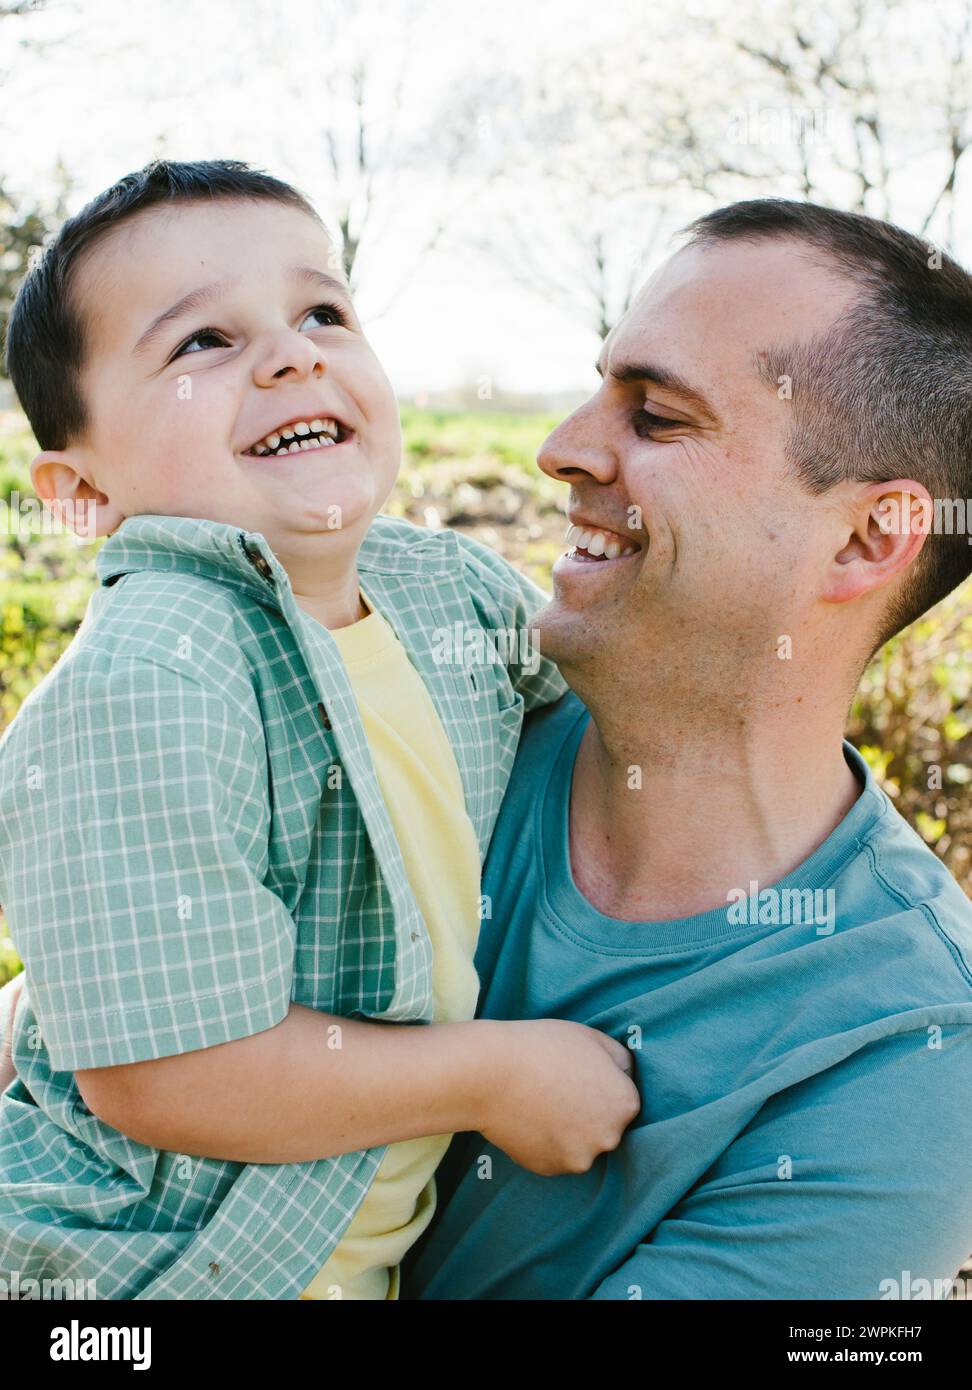 Laughing and smiling father holding son together in spring Stock Photo